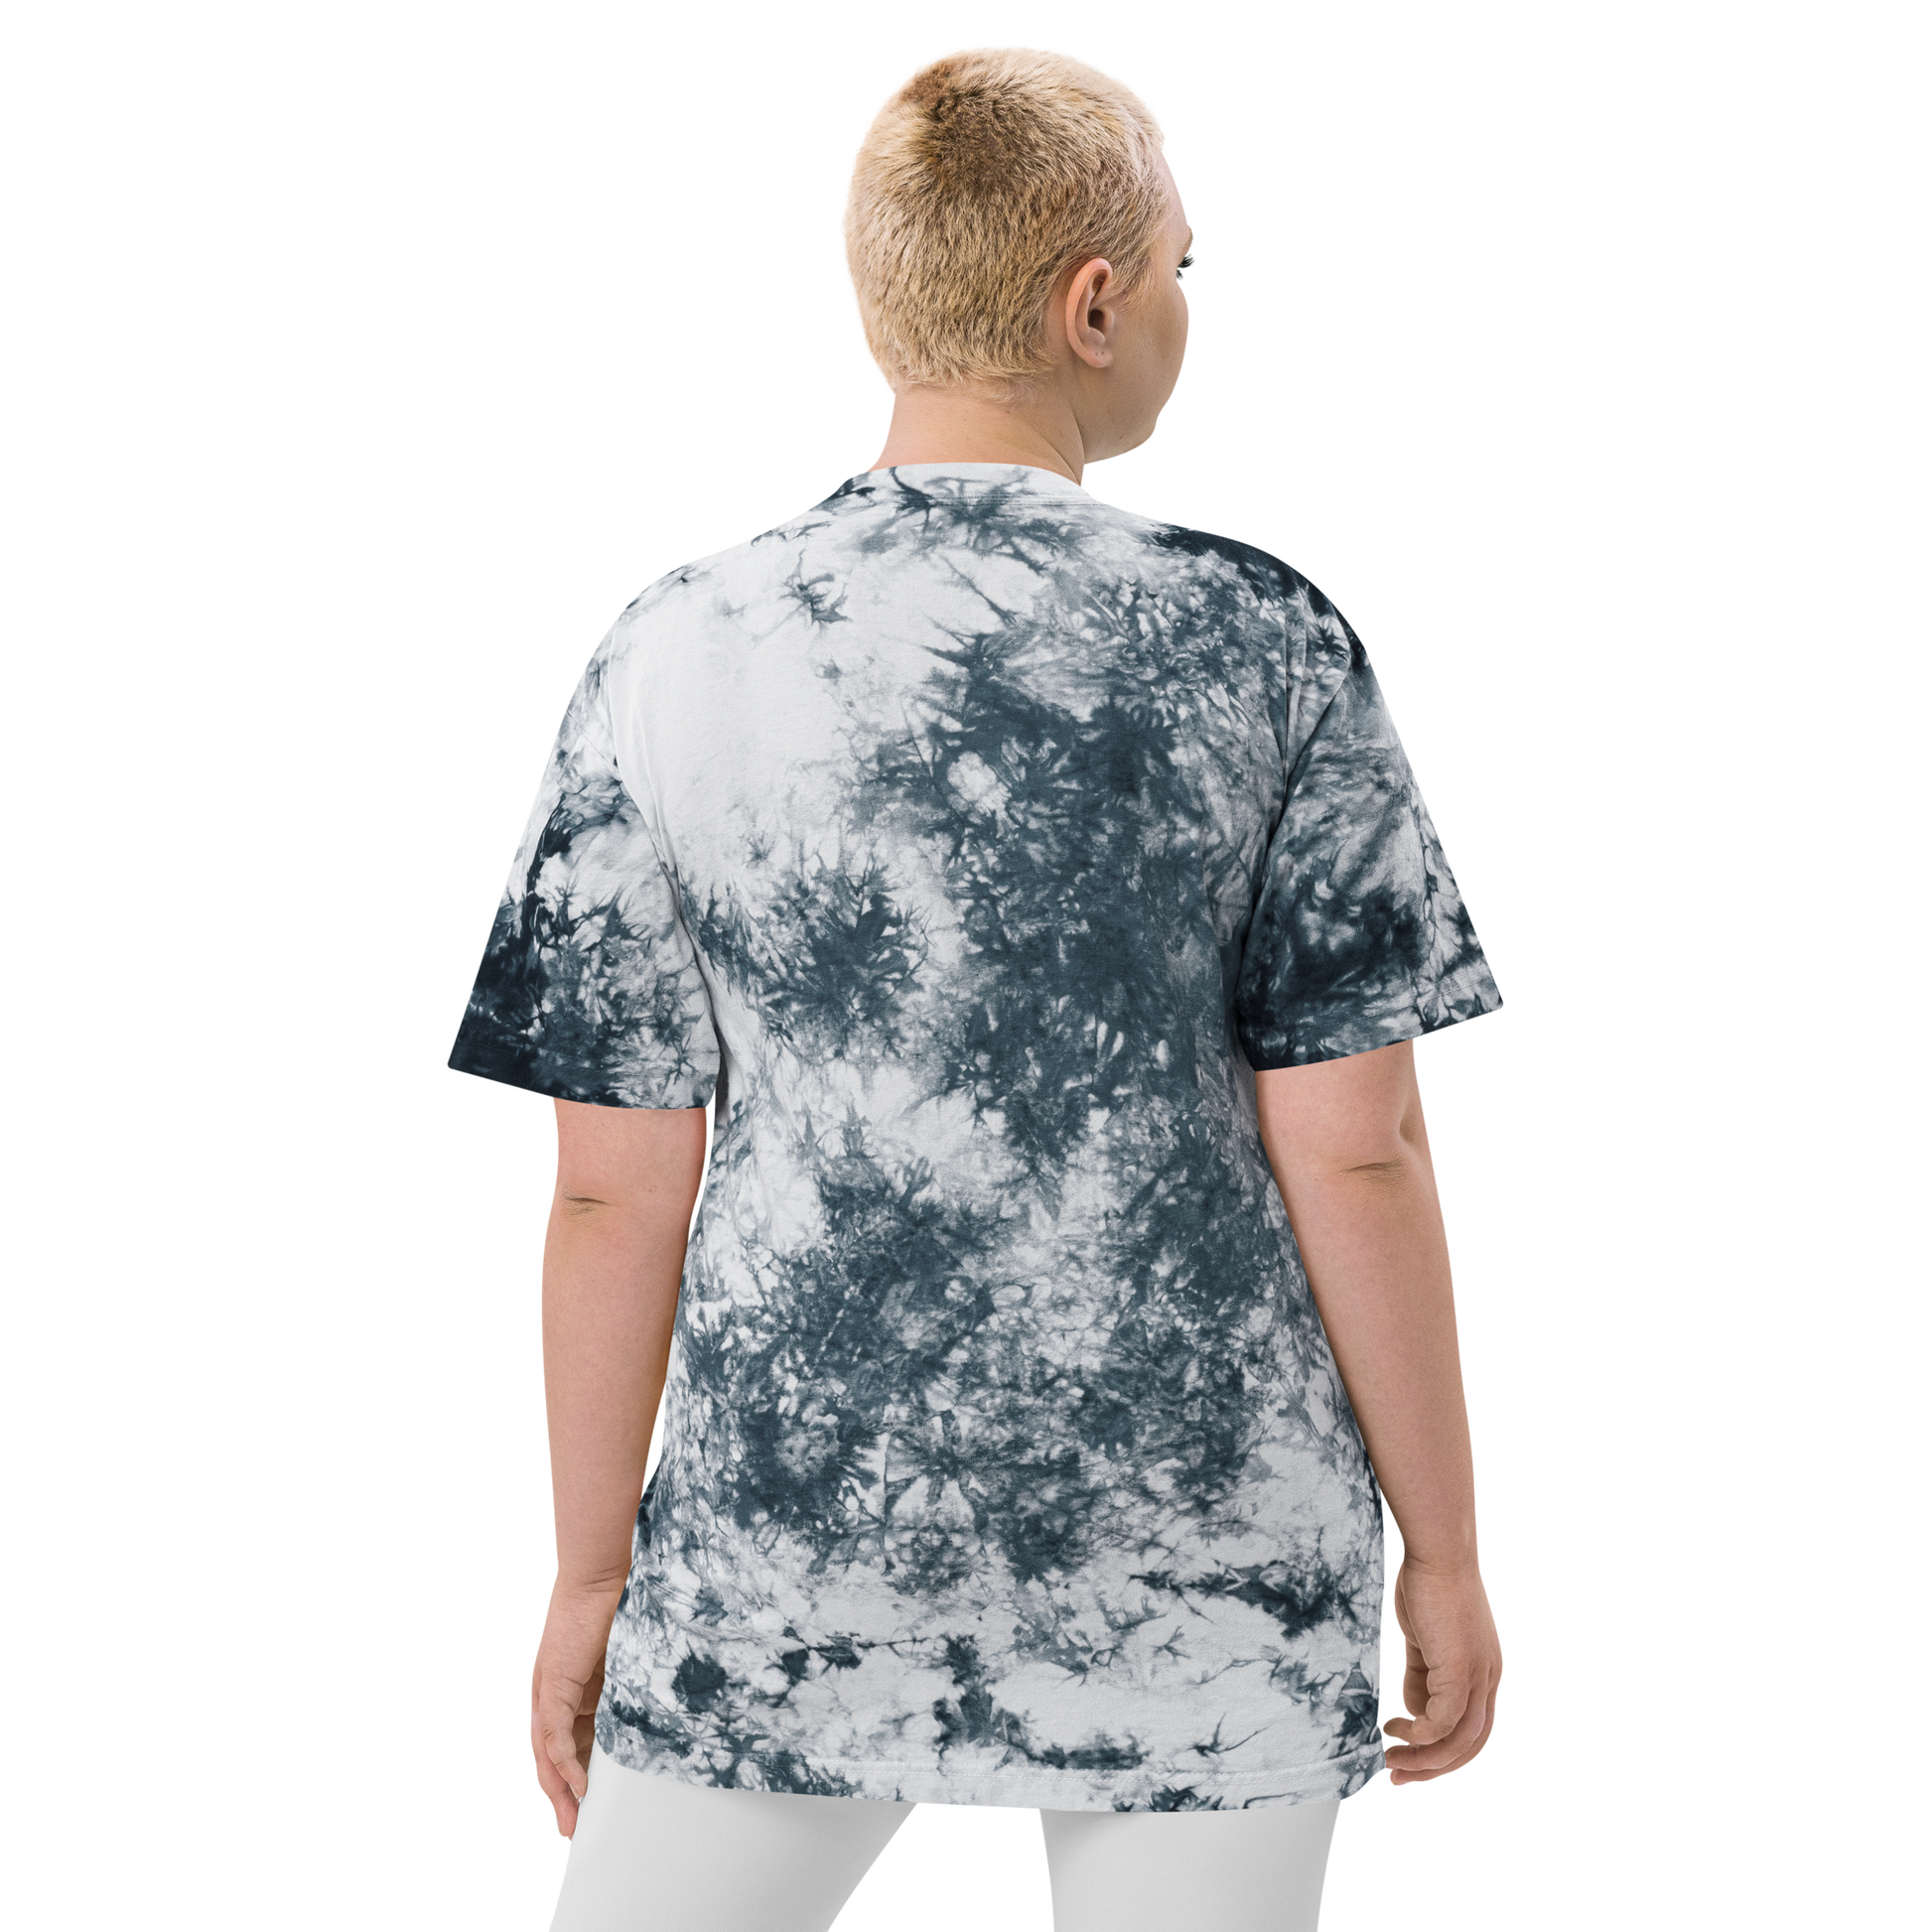 YHM Designs - YXE Saskatoon Oversized Tie-Dye T-Shirt - Crossed-X Design with Airport Code and Vintage Propliner - White Embroidery - Image 17